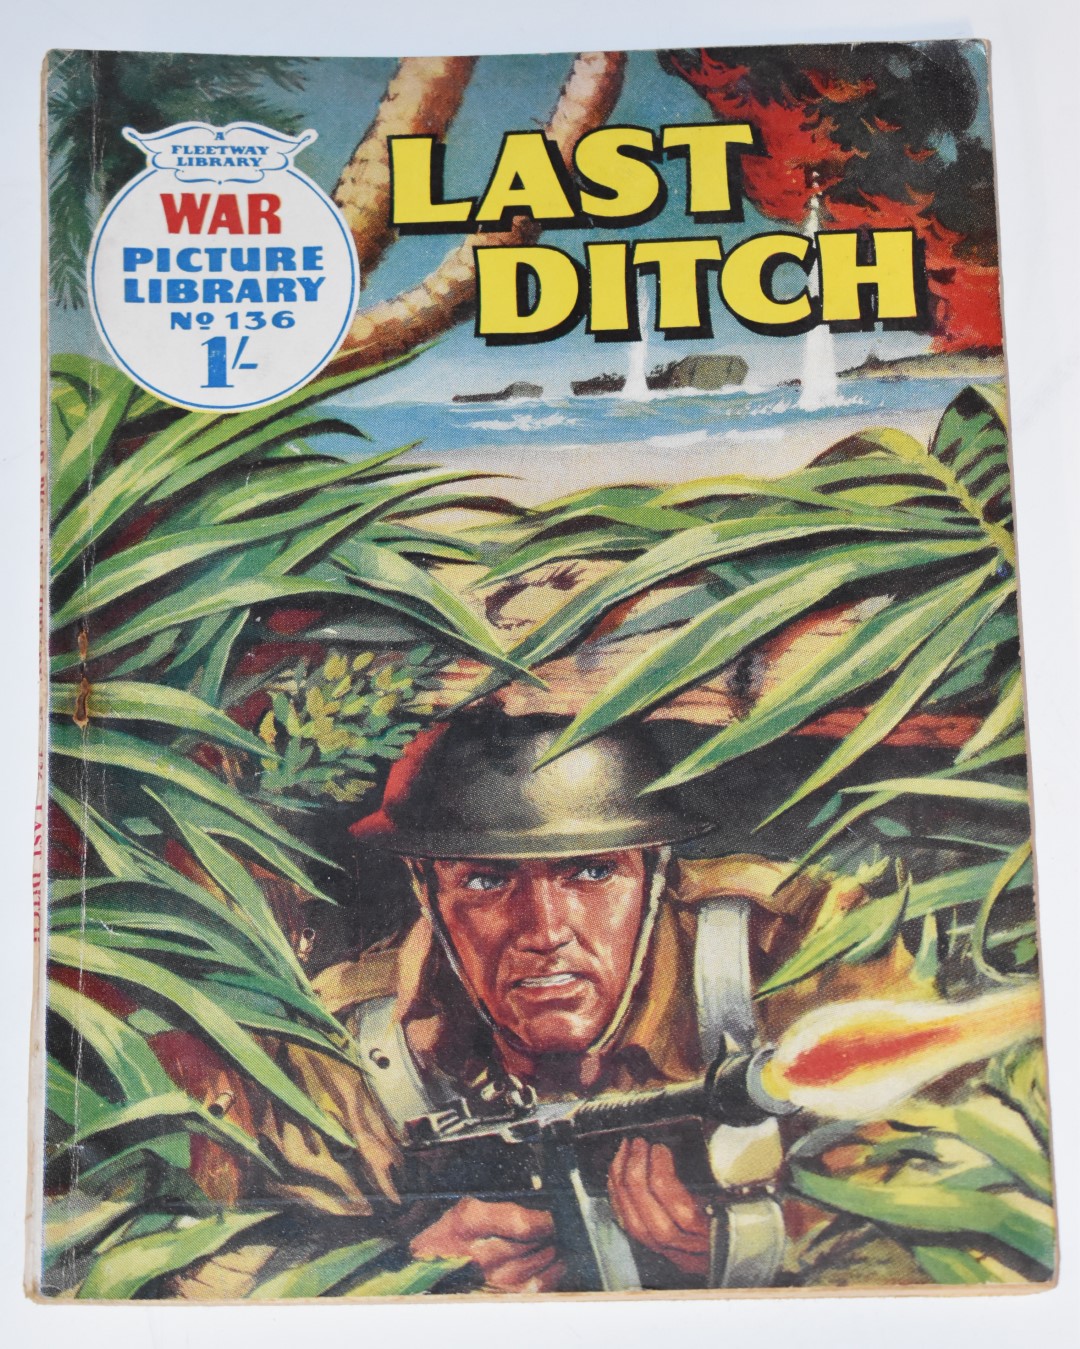 Ninety-Five War Picture Library comic books by Fleetway Publications - Image 8 of 8